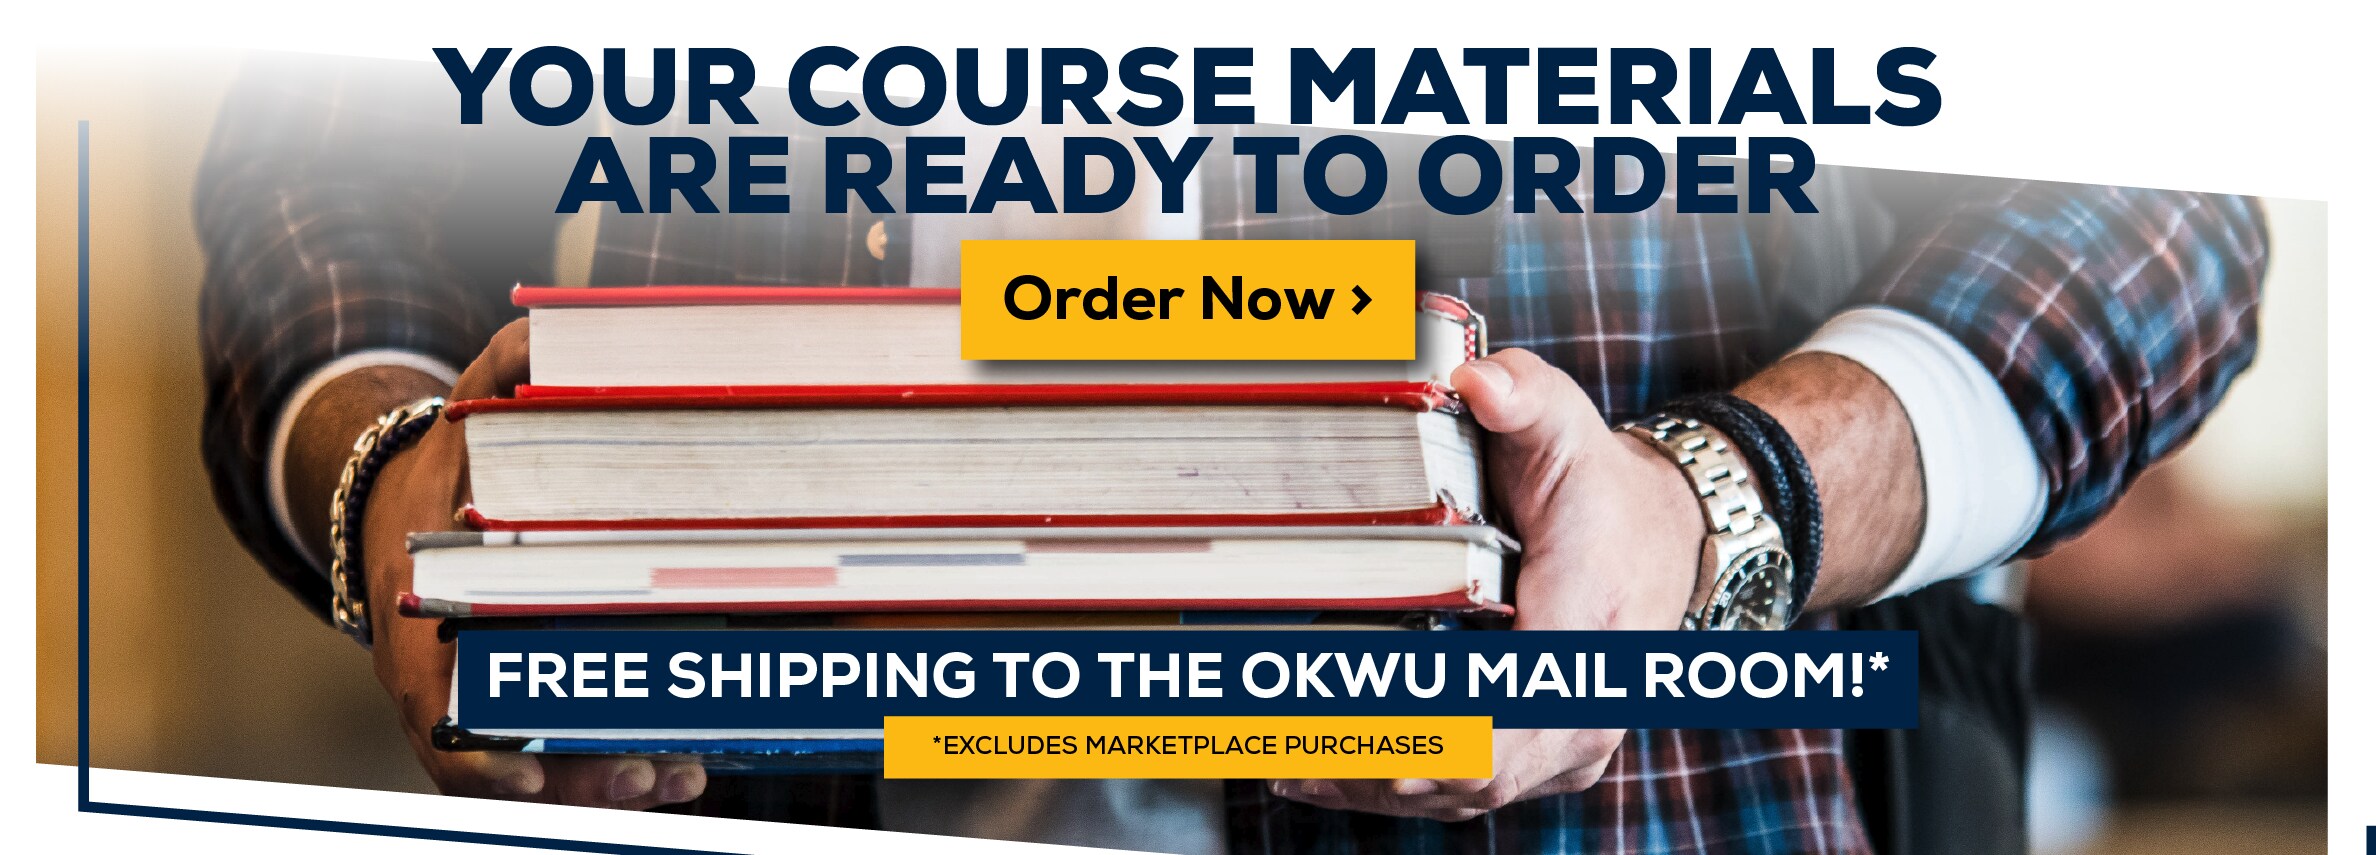 Your Course Materials are Ready to Order. Order Now. Free shipping to the OKWU Mail Room! *Excludes marketplace purchases.